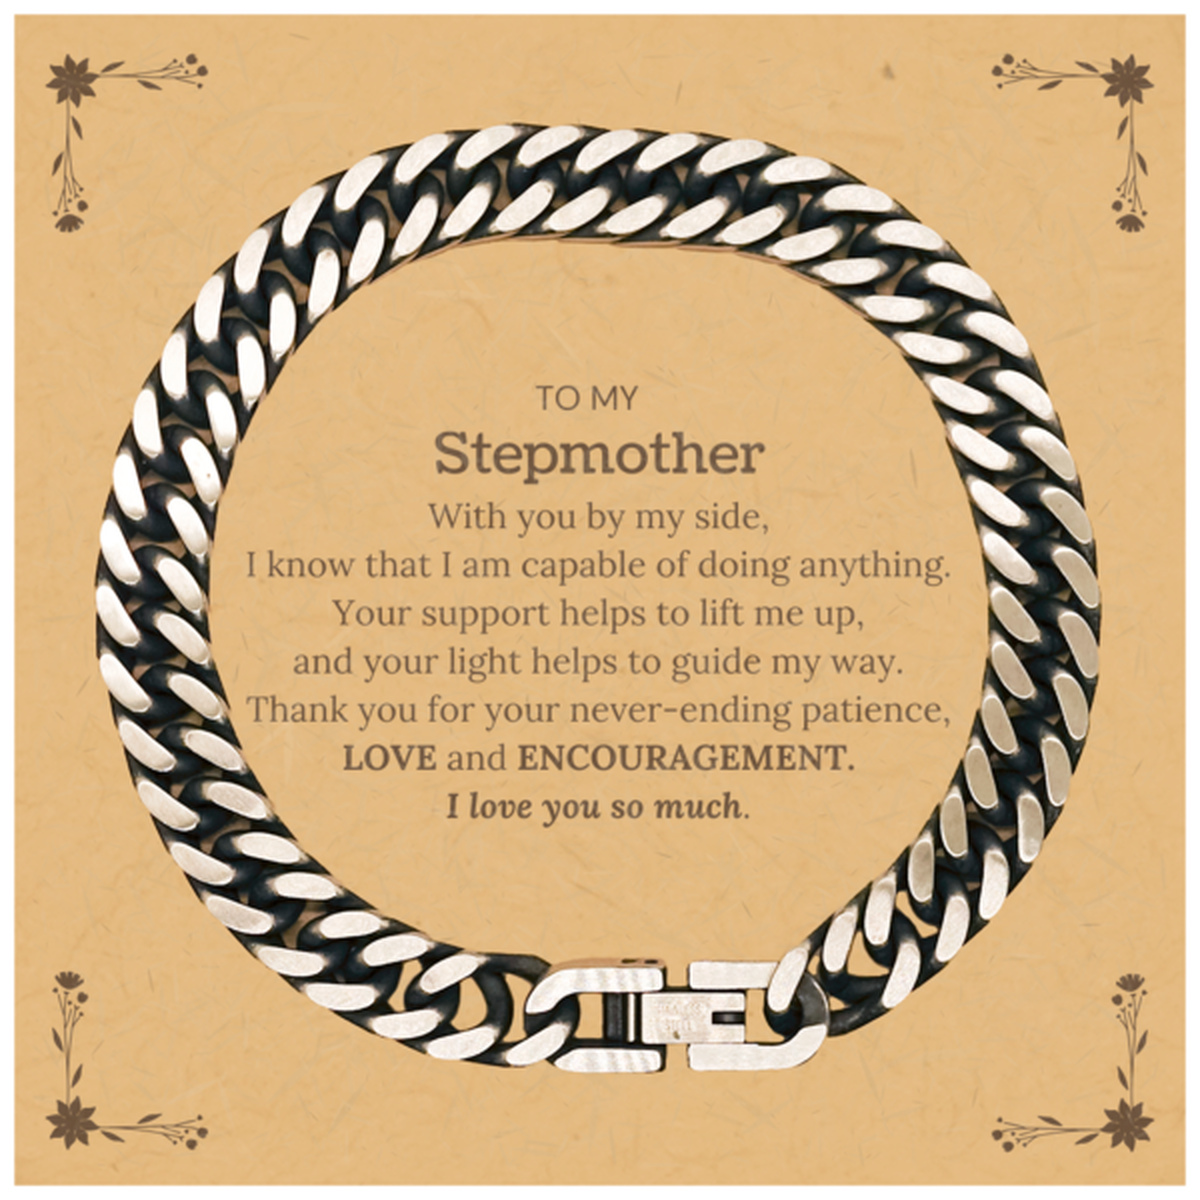 Appreciation Stepmother Cuban Link Chain Bracelet Gifts, To My Stepmother Birthday Christmas Wedding Keepsake Gifts for Stepmother With you by my side, I know that I am capable of doing anything. I love you so much